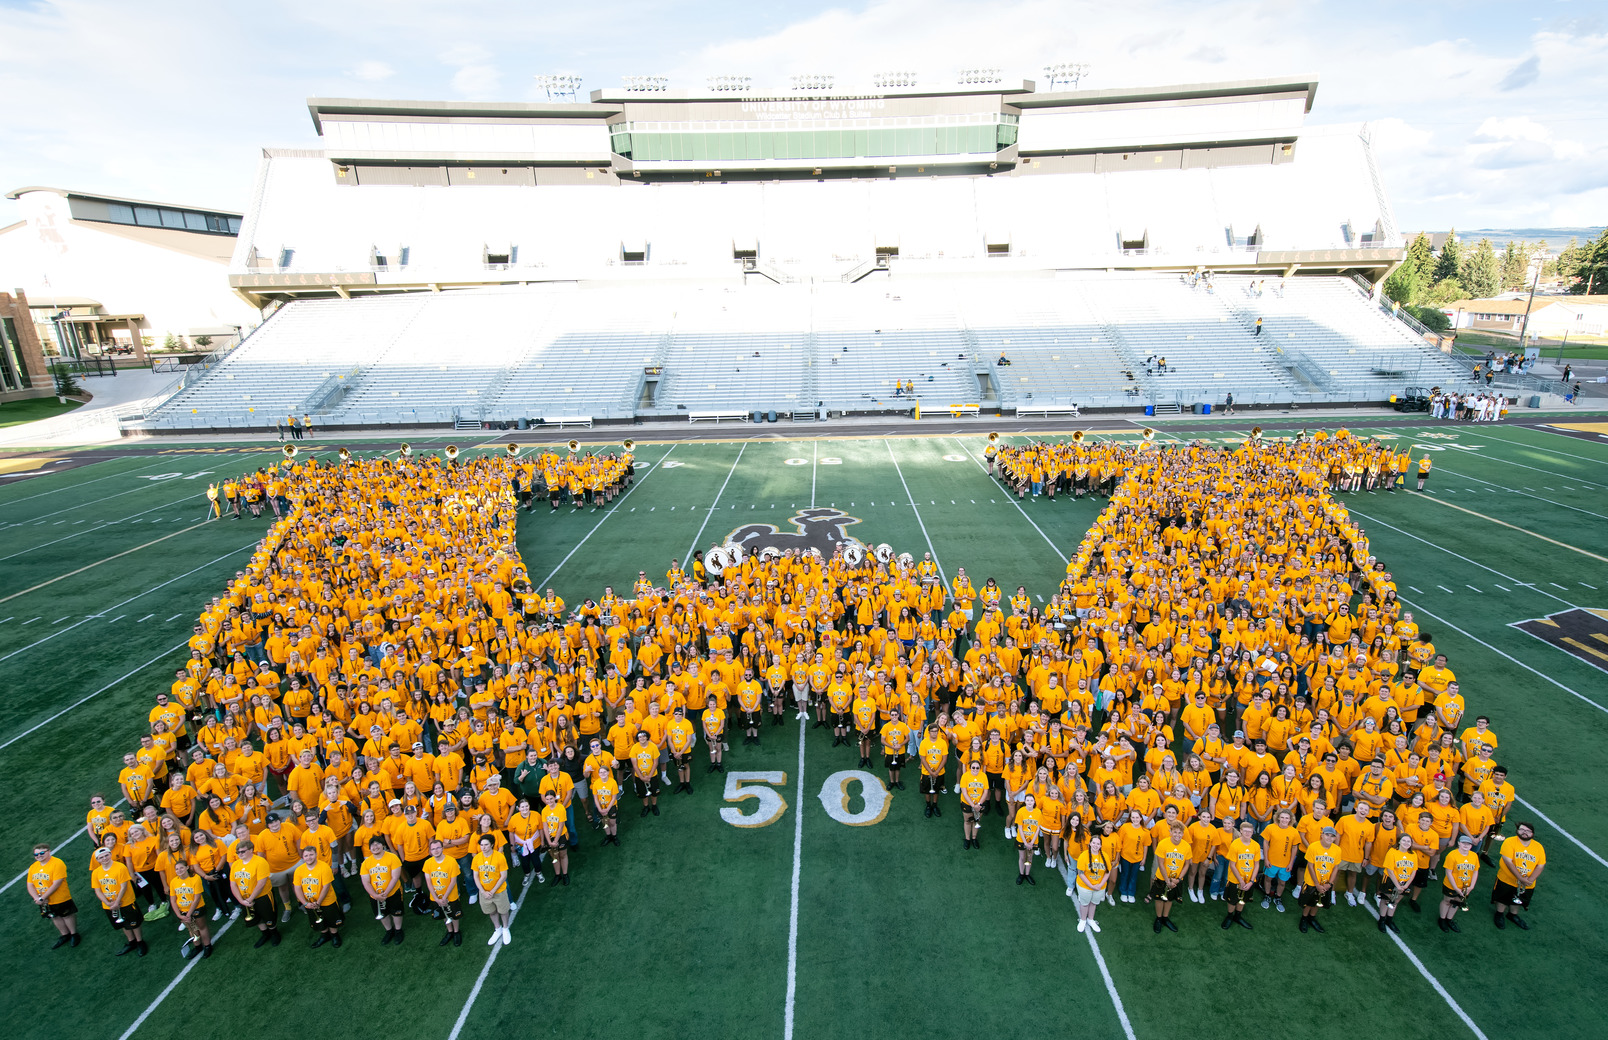 Students making a "W" on the football field for class picture